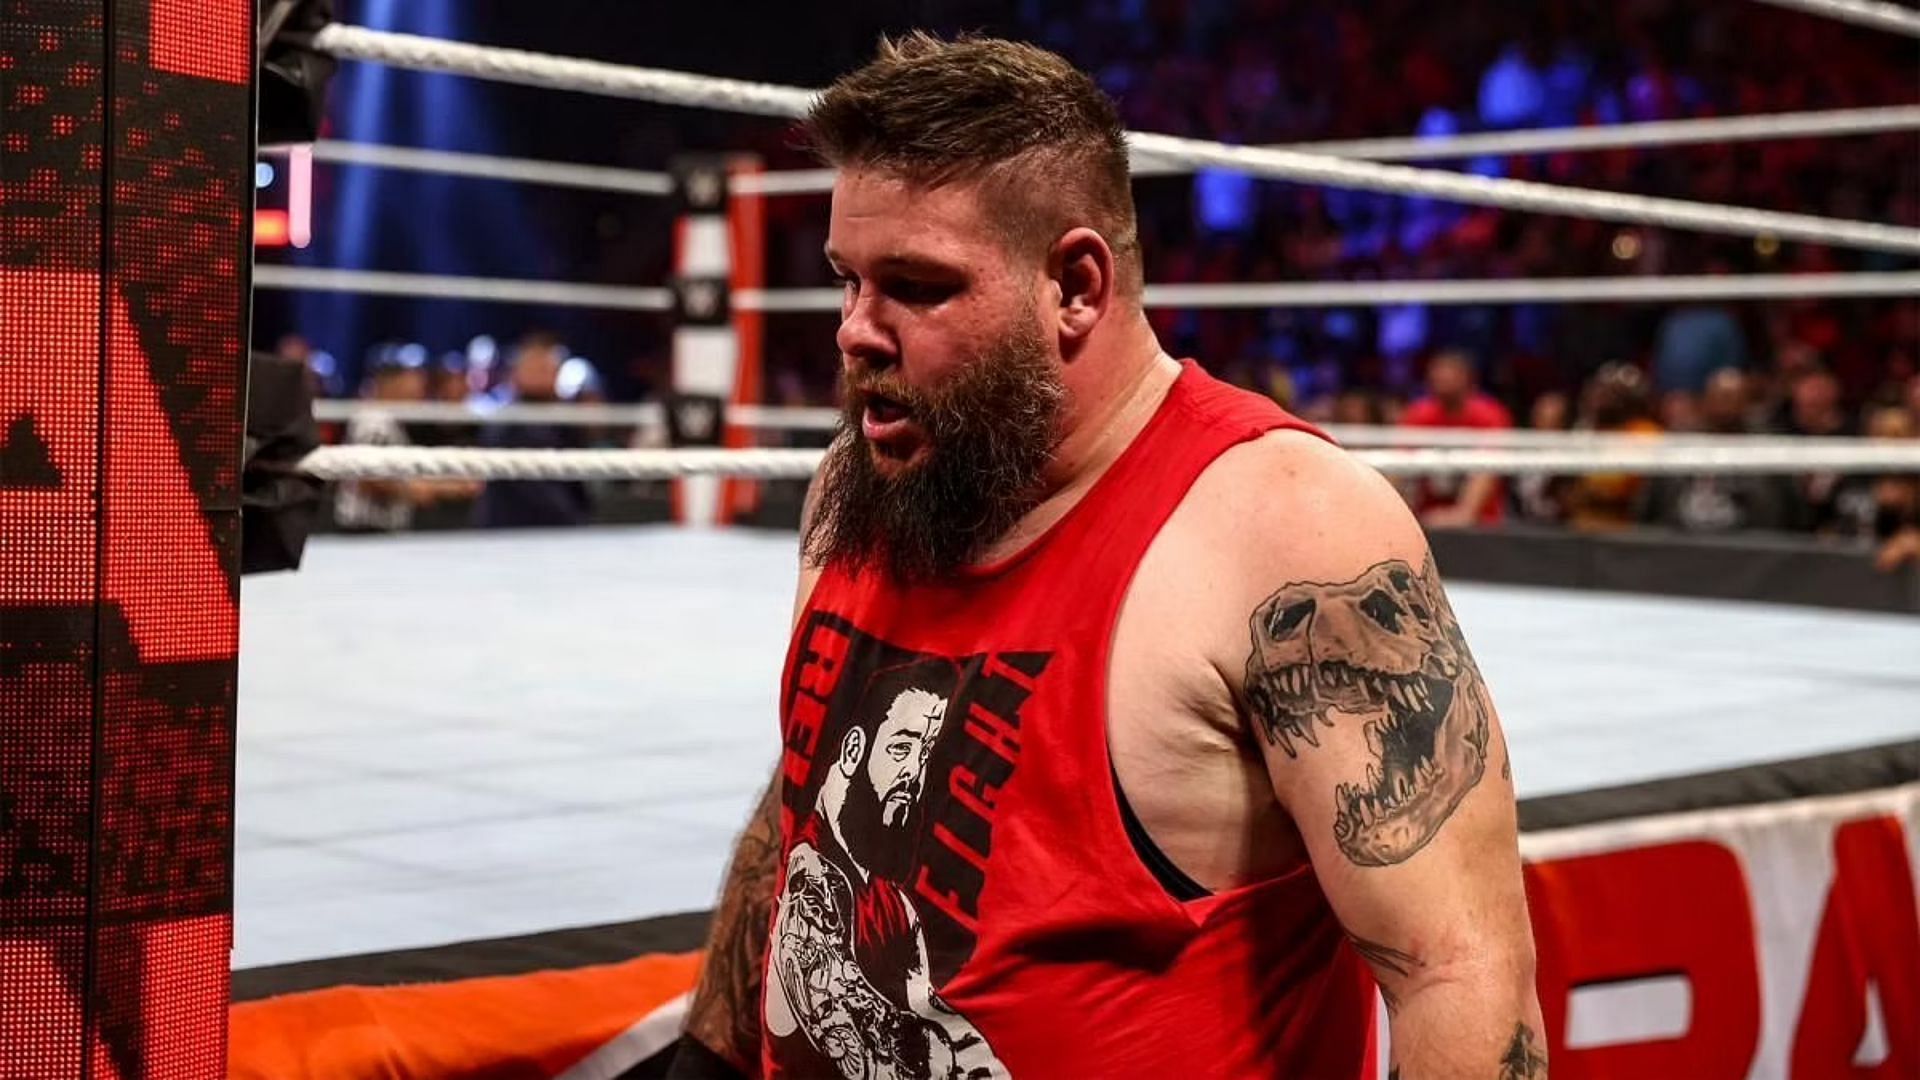 Owens was meant to appear on WWE RAW last night